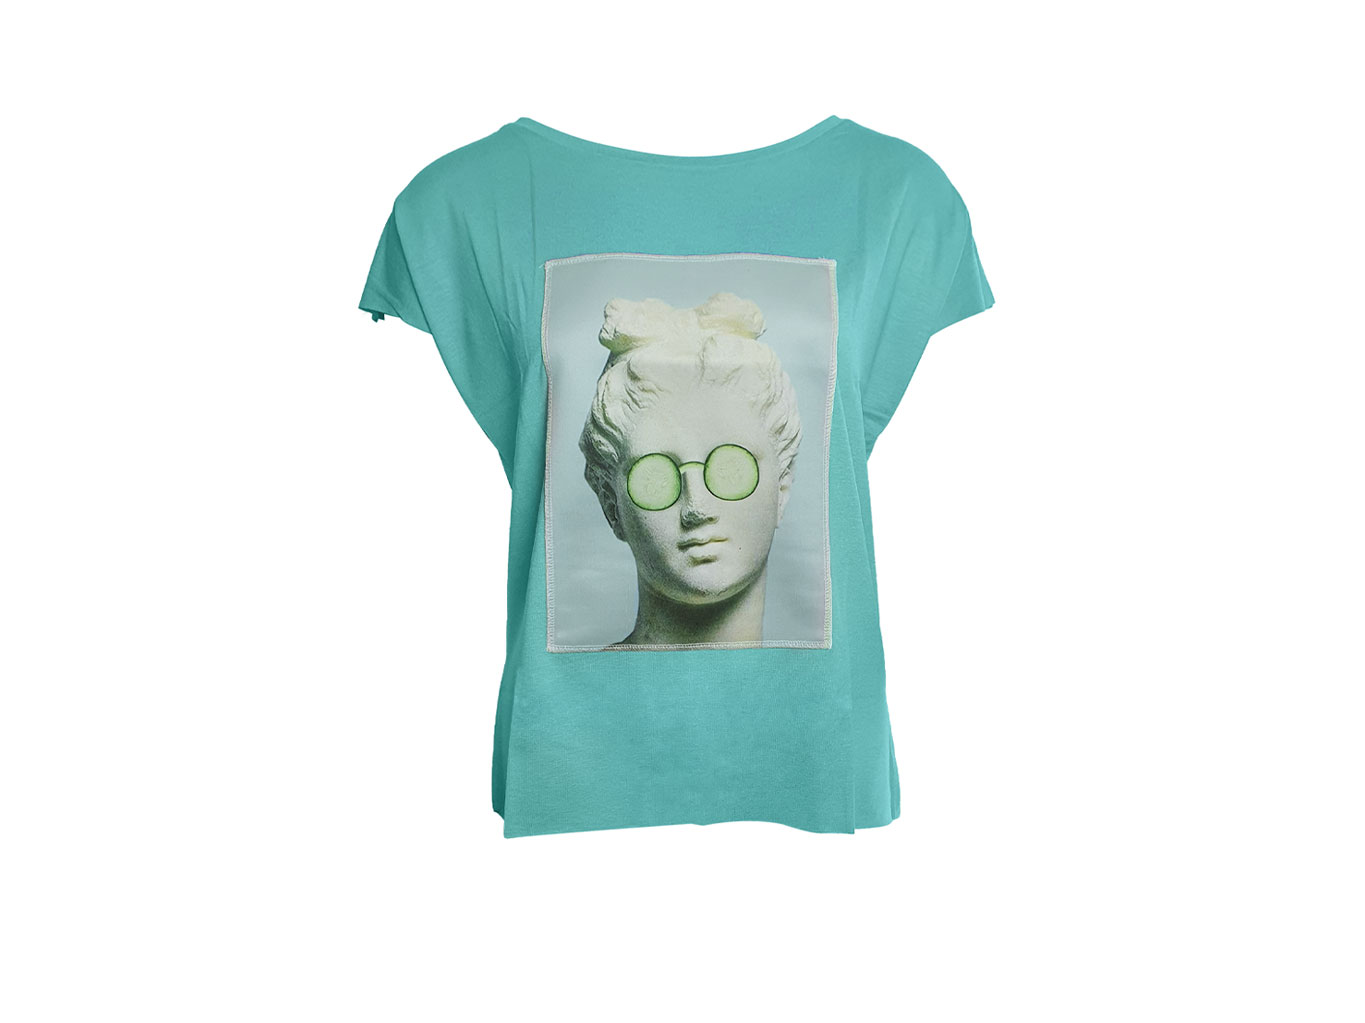 Aphrodite Turquoise T-Shirt - Ripped Cotton